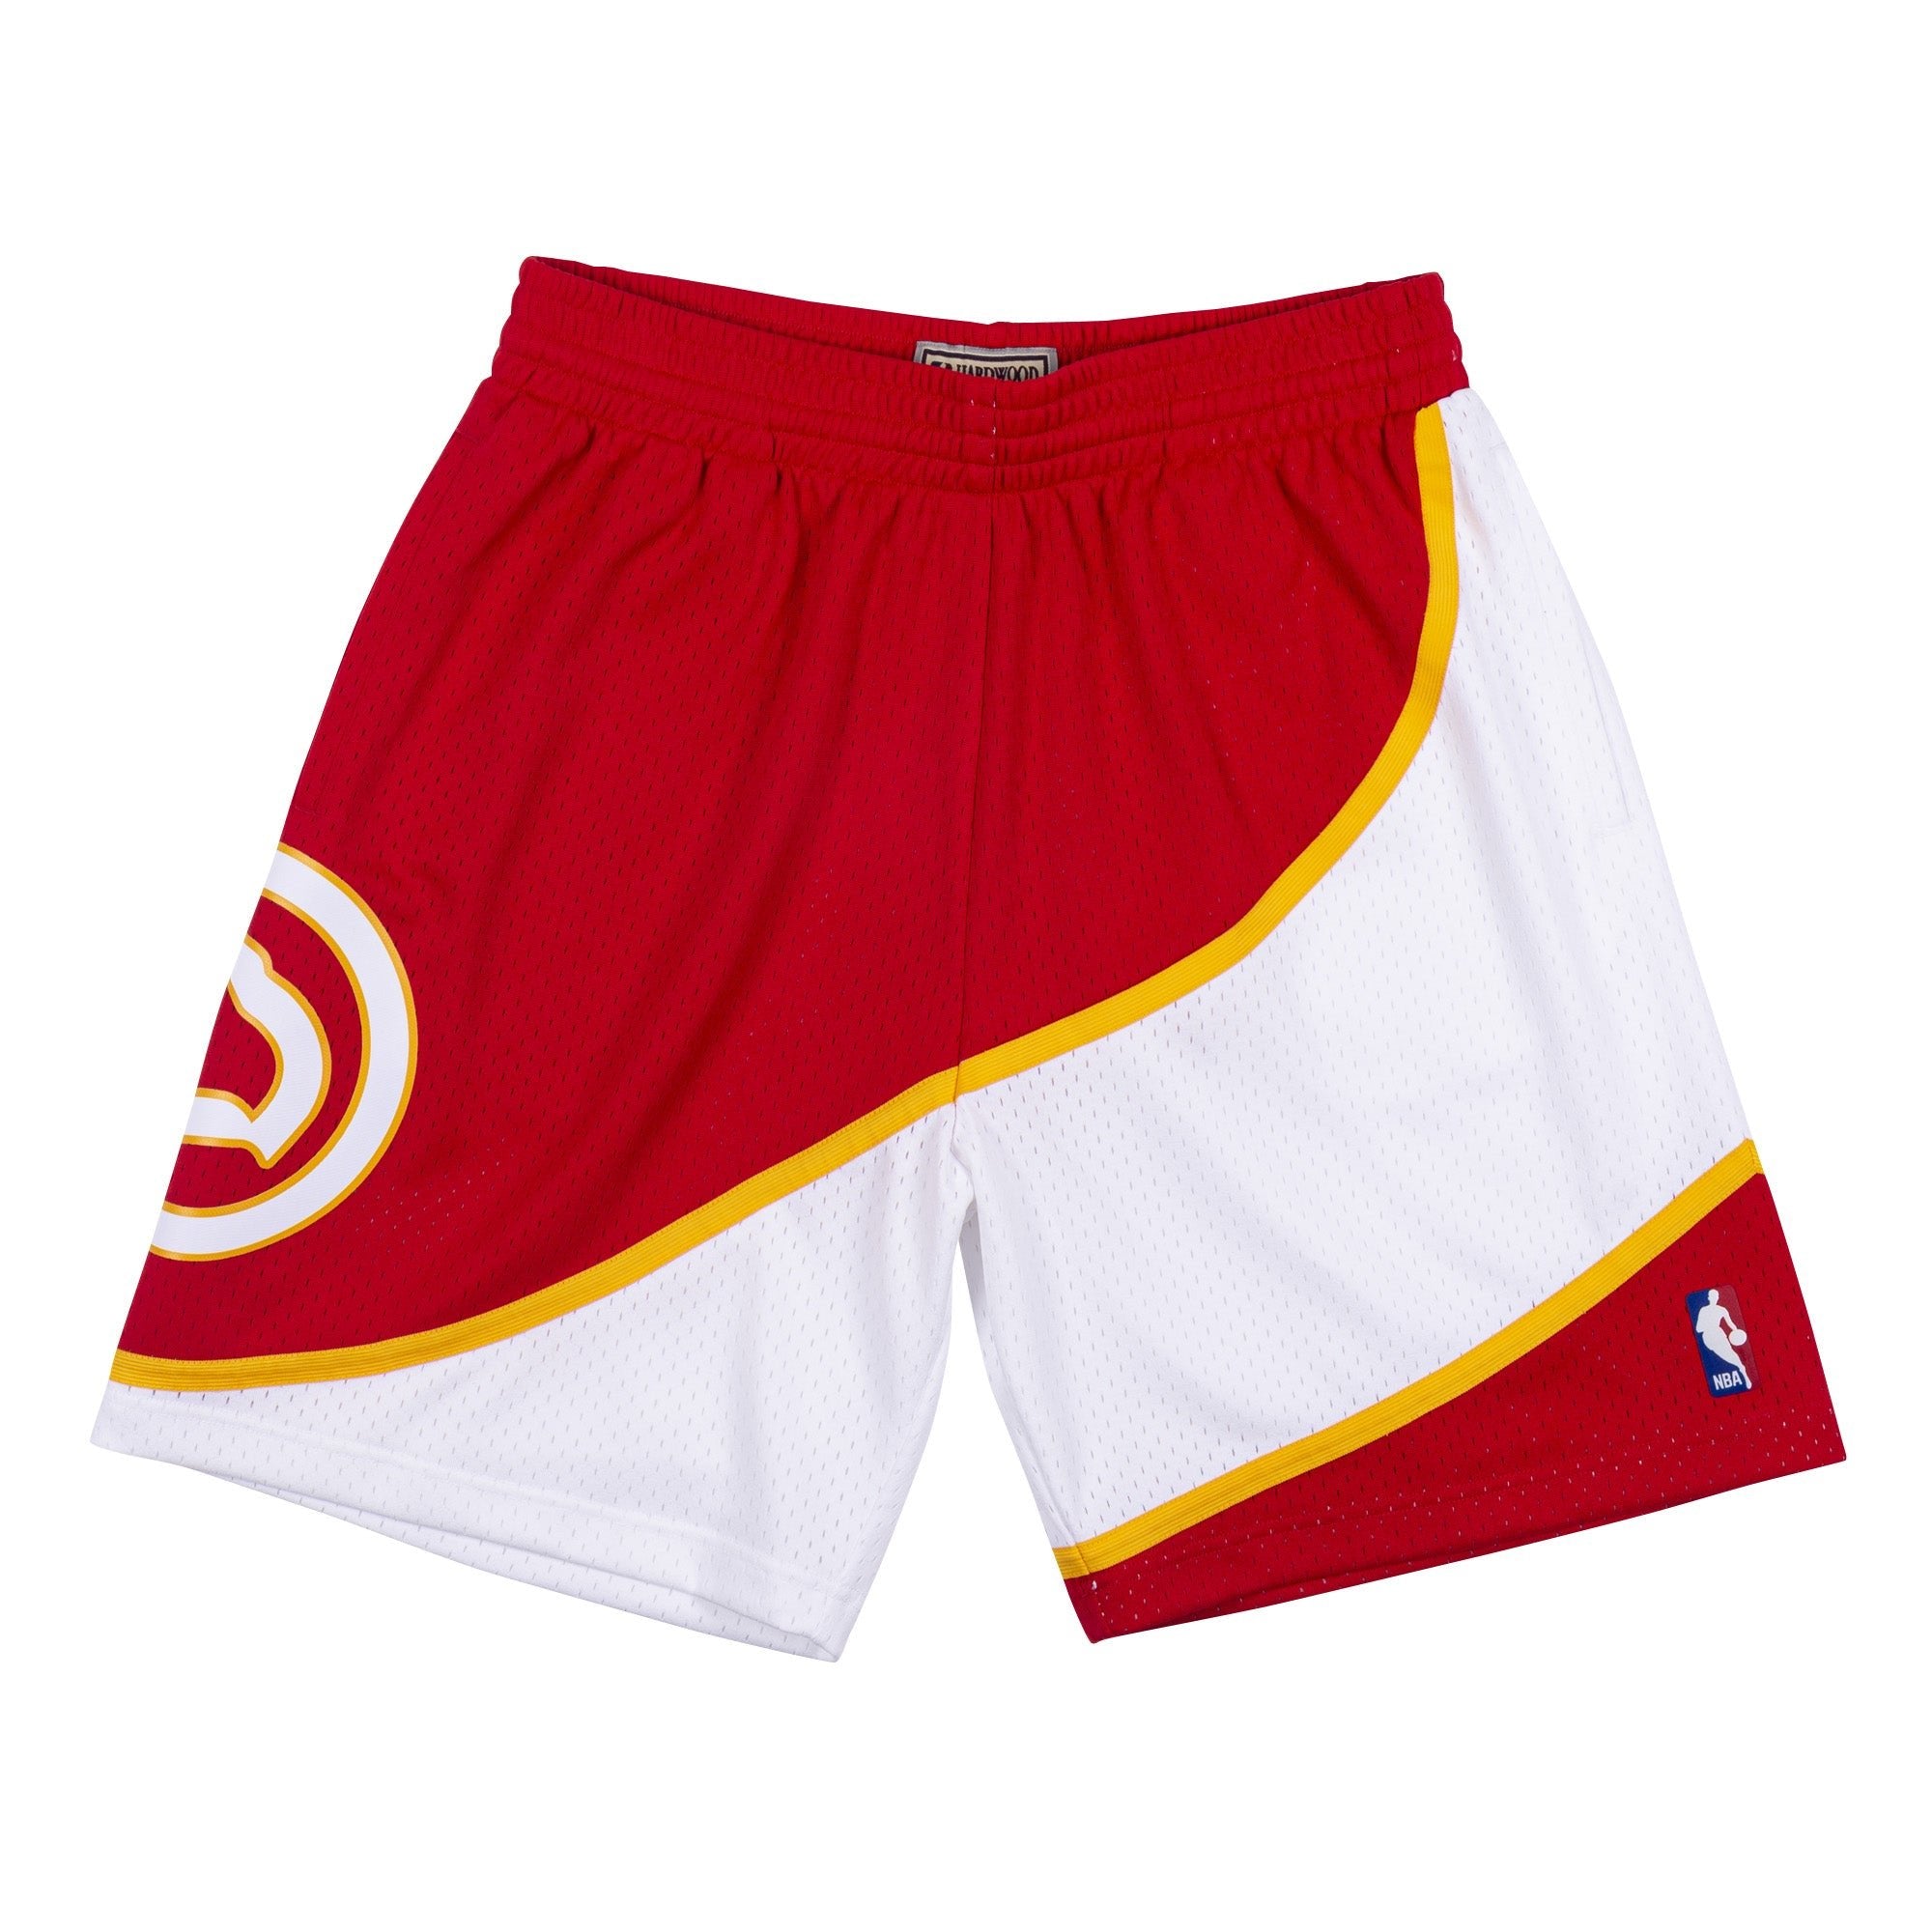 The Hawks are gonna wear mismatched shorts and look like huge doofuses 